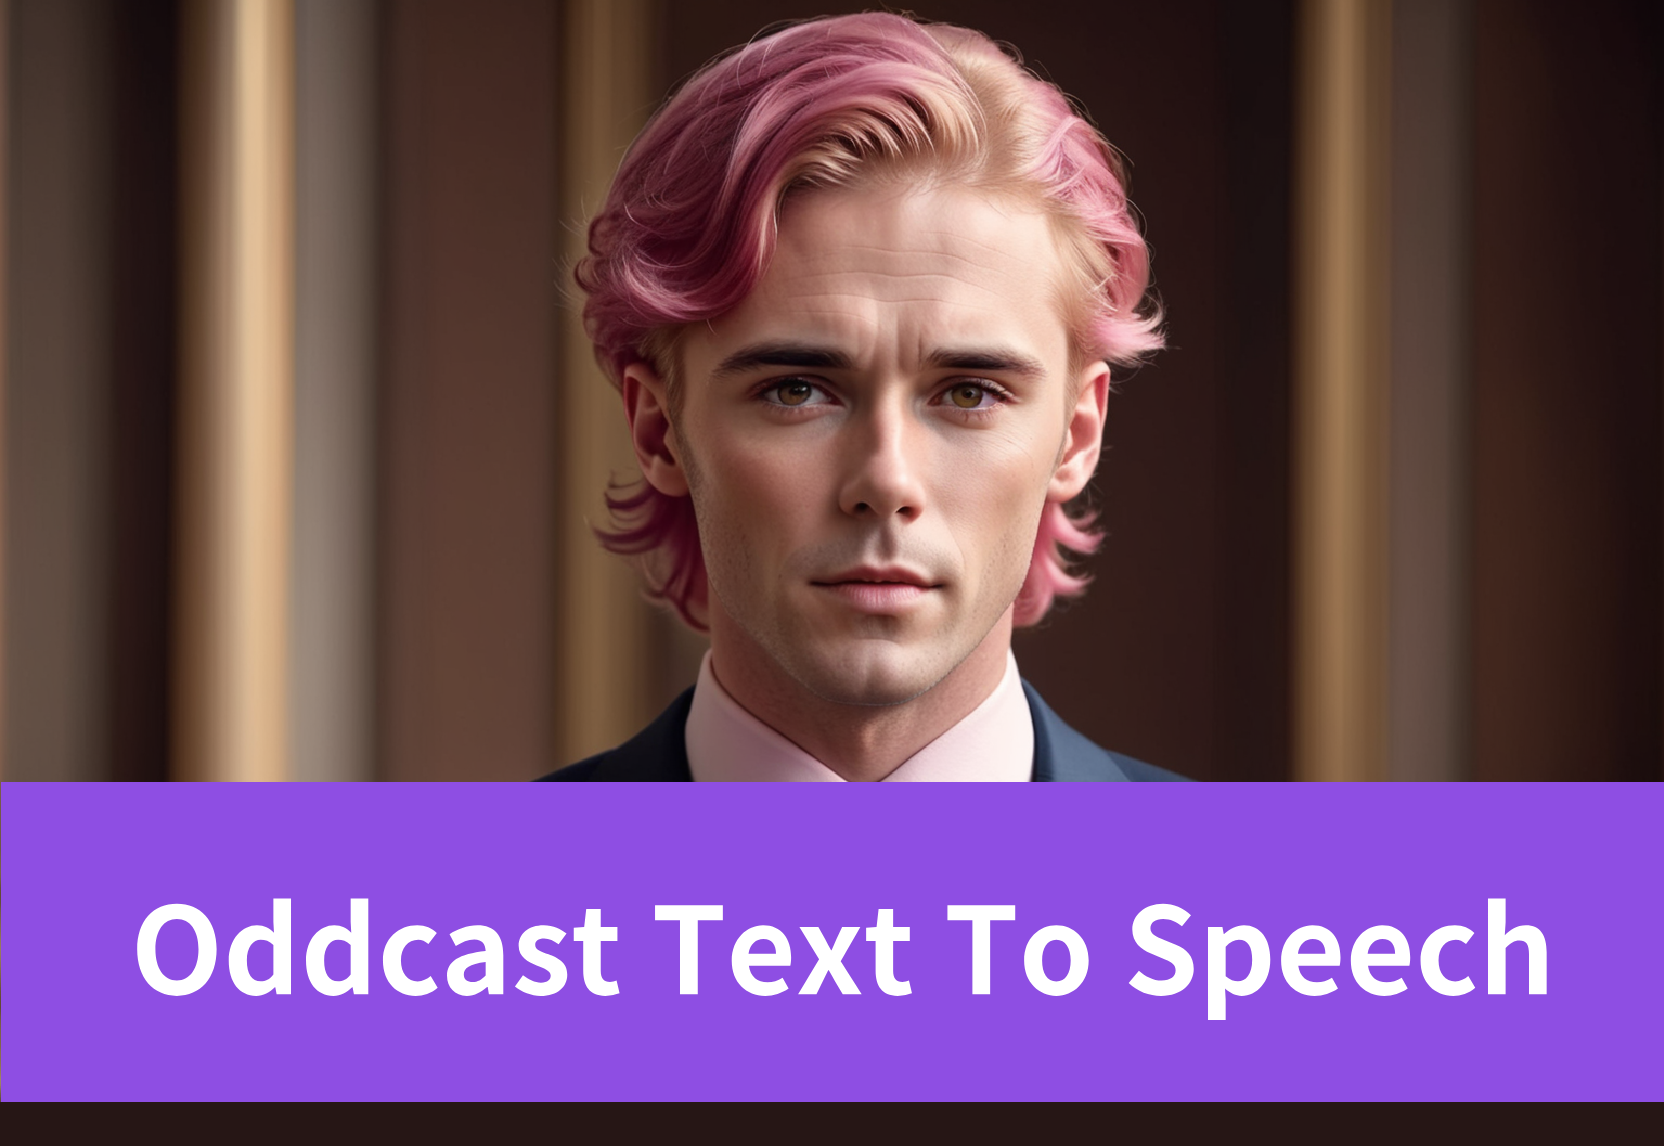 Master Oddcast Text To Speech: The Ultimate Guide